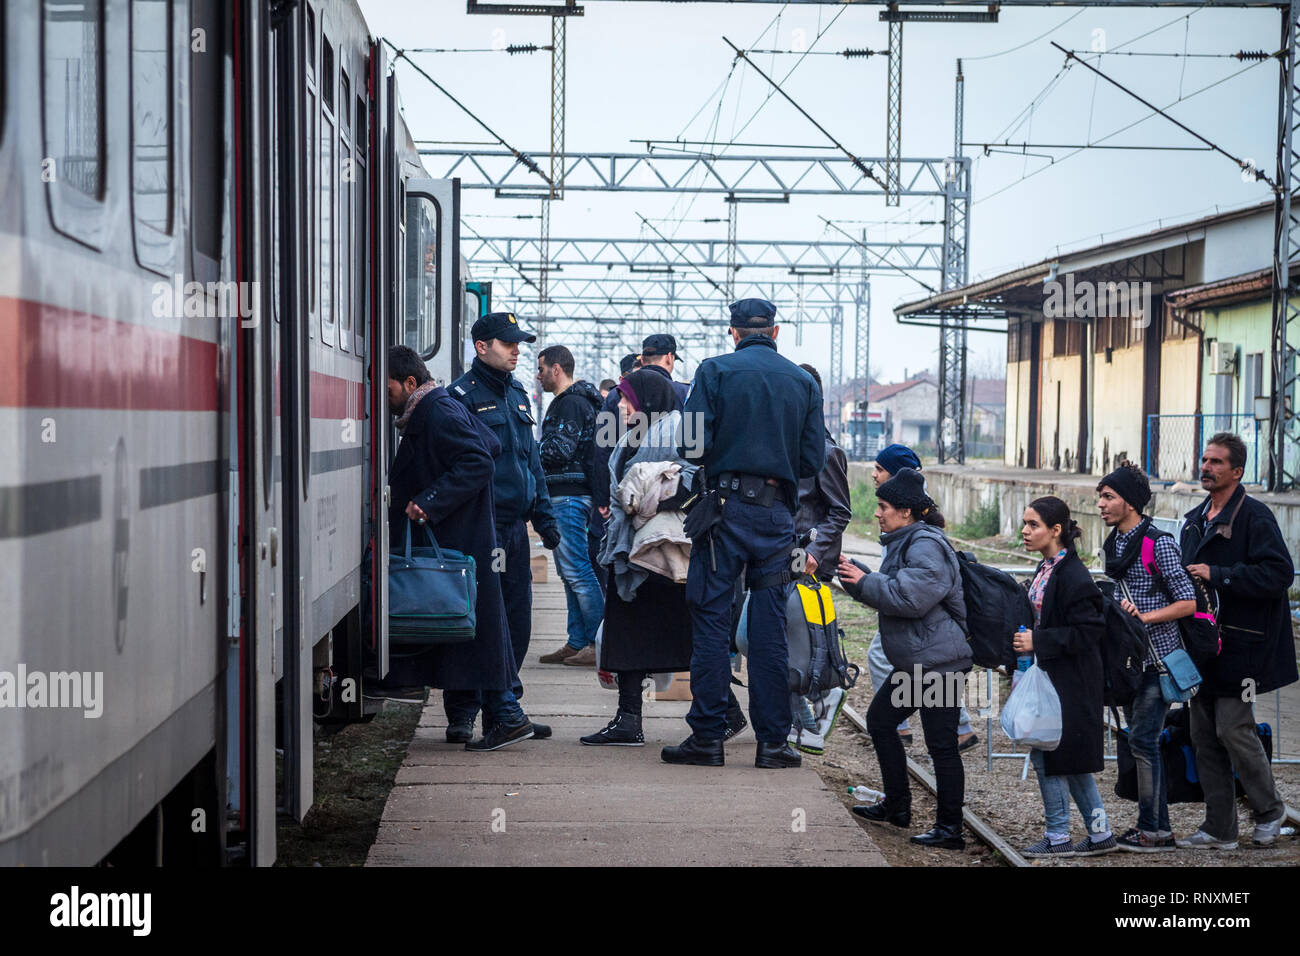 SID, SERBIA - NOVEMBER 14, 2015: Croatian police officers checking refugees, boarding a train to cross the Croatia Serbia border, at the Sid train sta Stock Photo